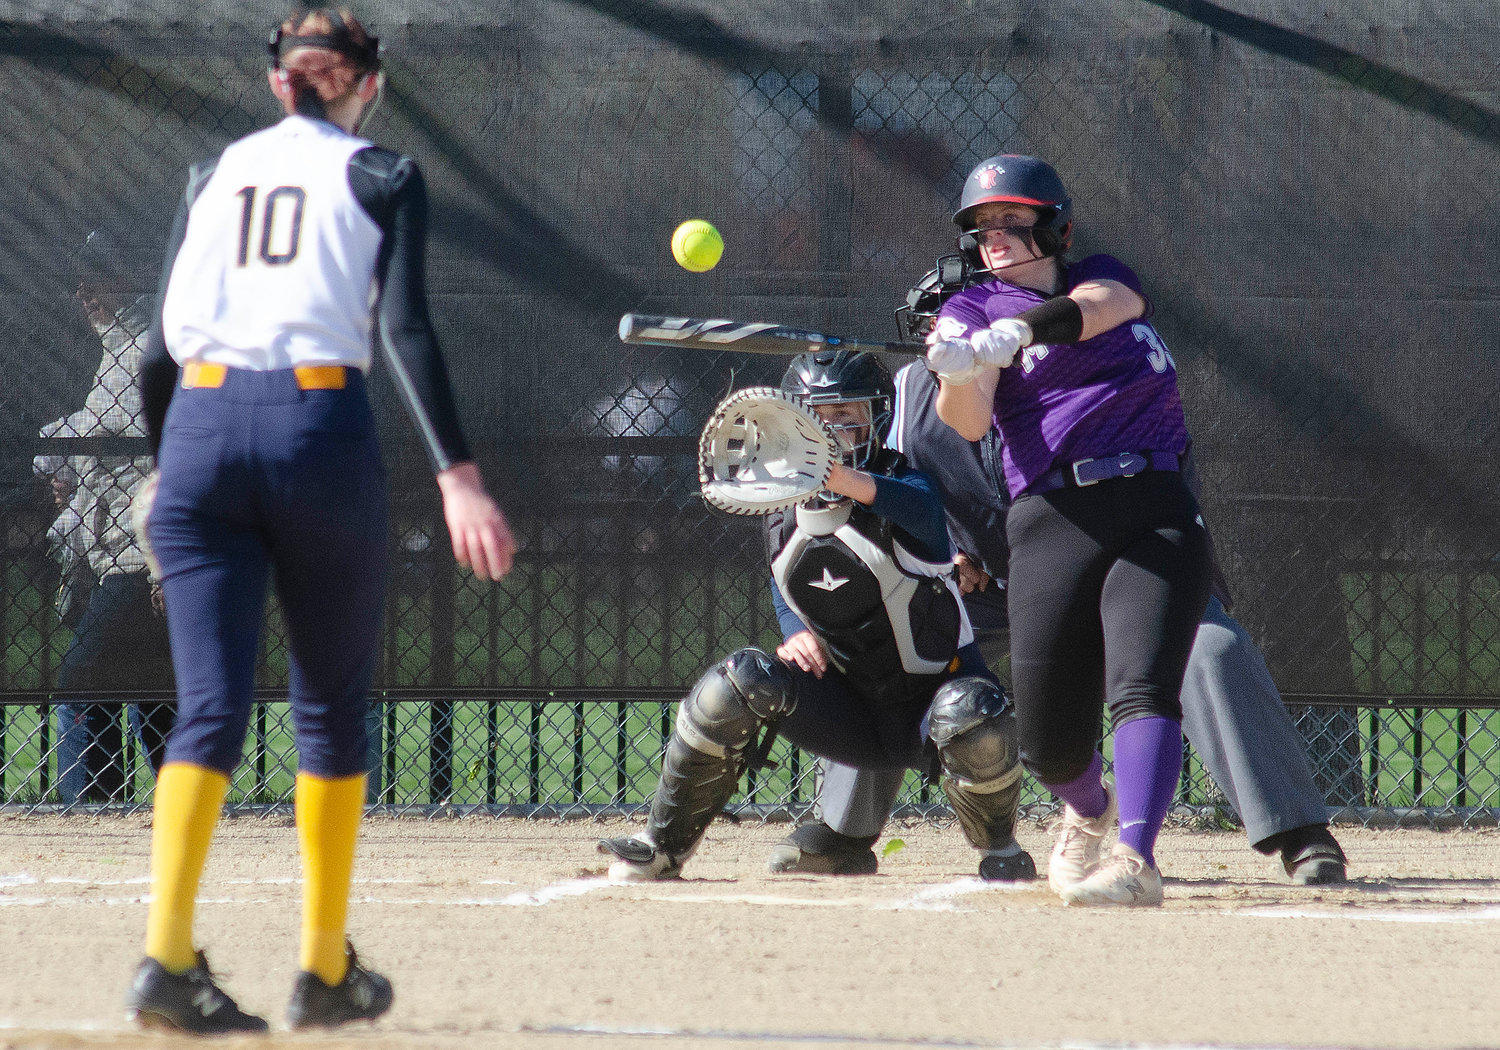 Clean up hitter Grace Stephenson smacks one of her four hits during the Huskies 23-3 win at Barrington on Monday. Stephenson scored three runs and drove in two runs.